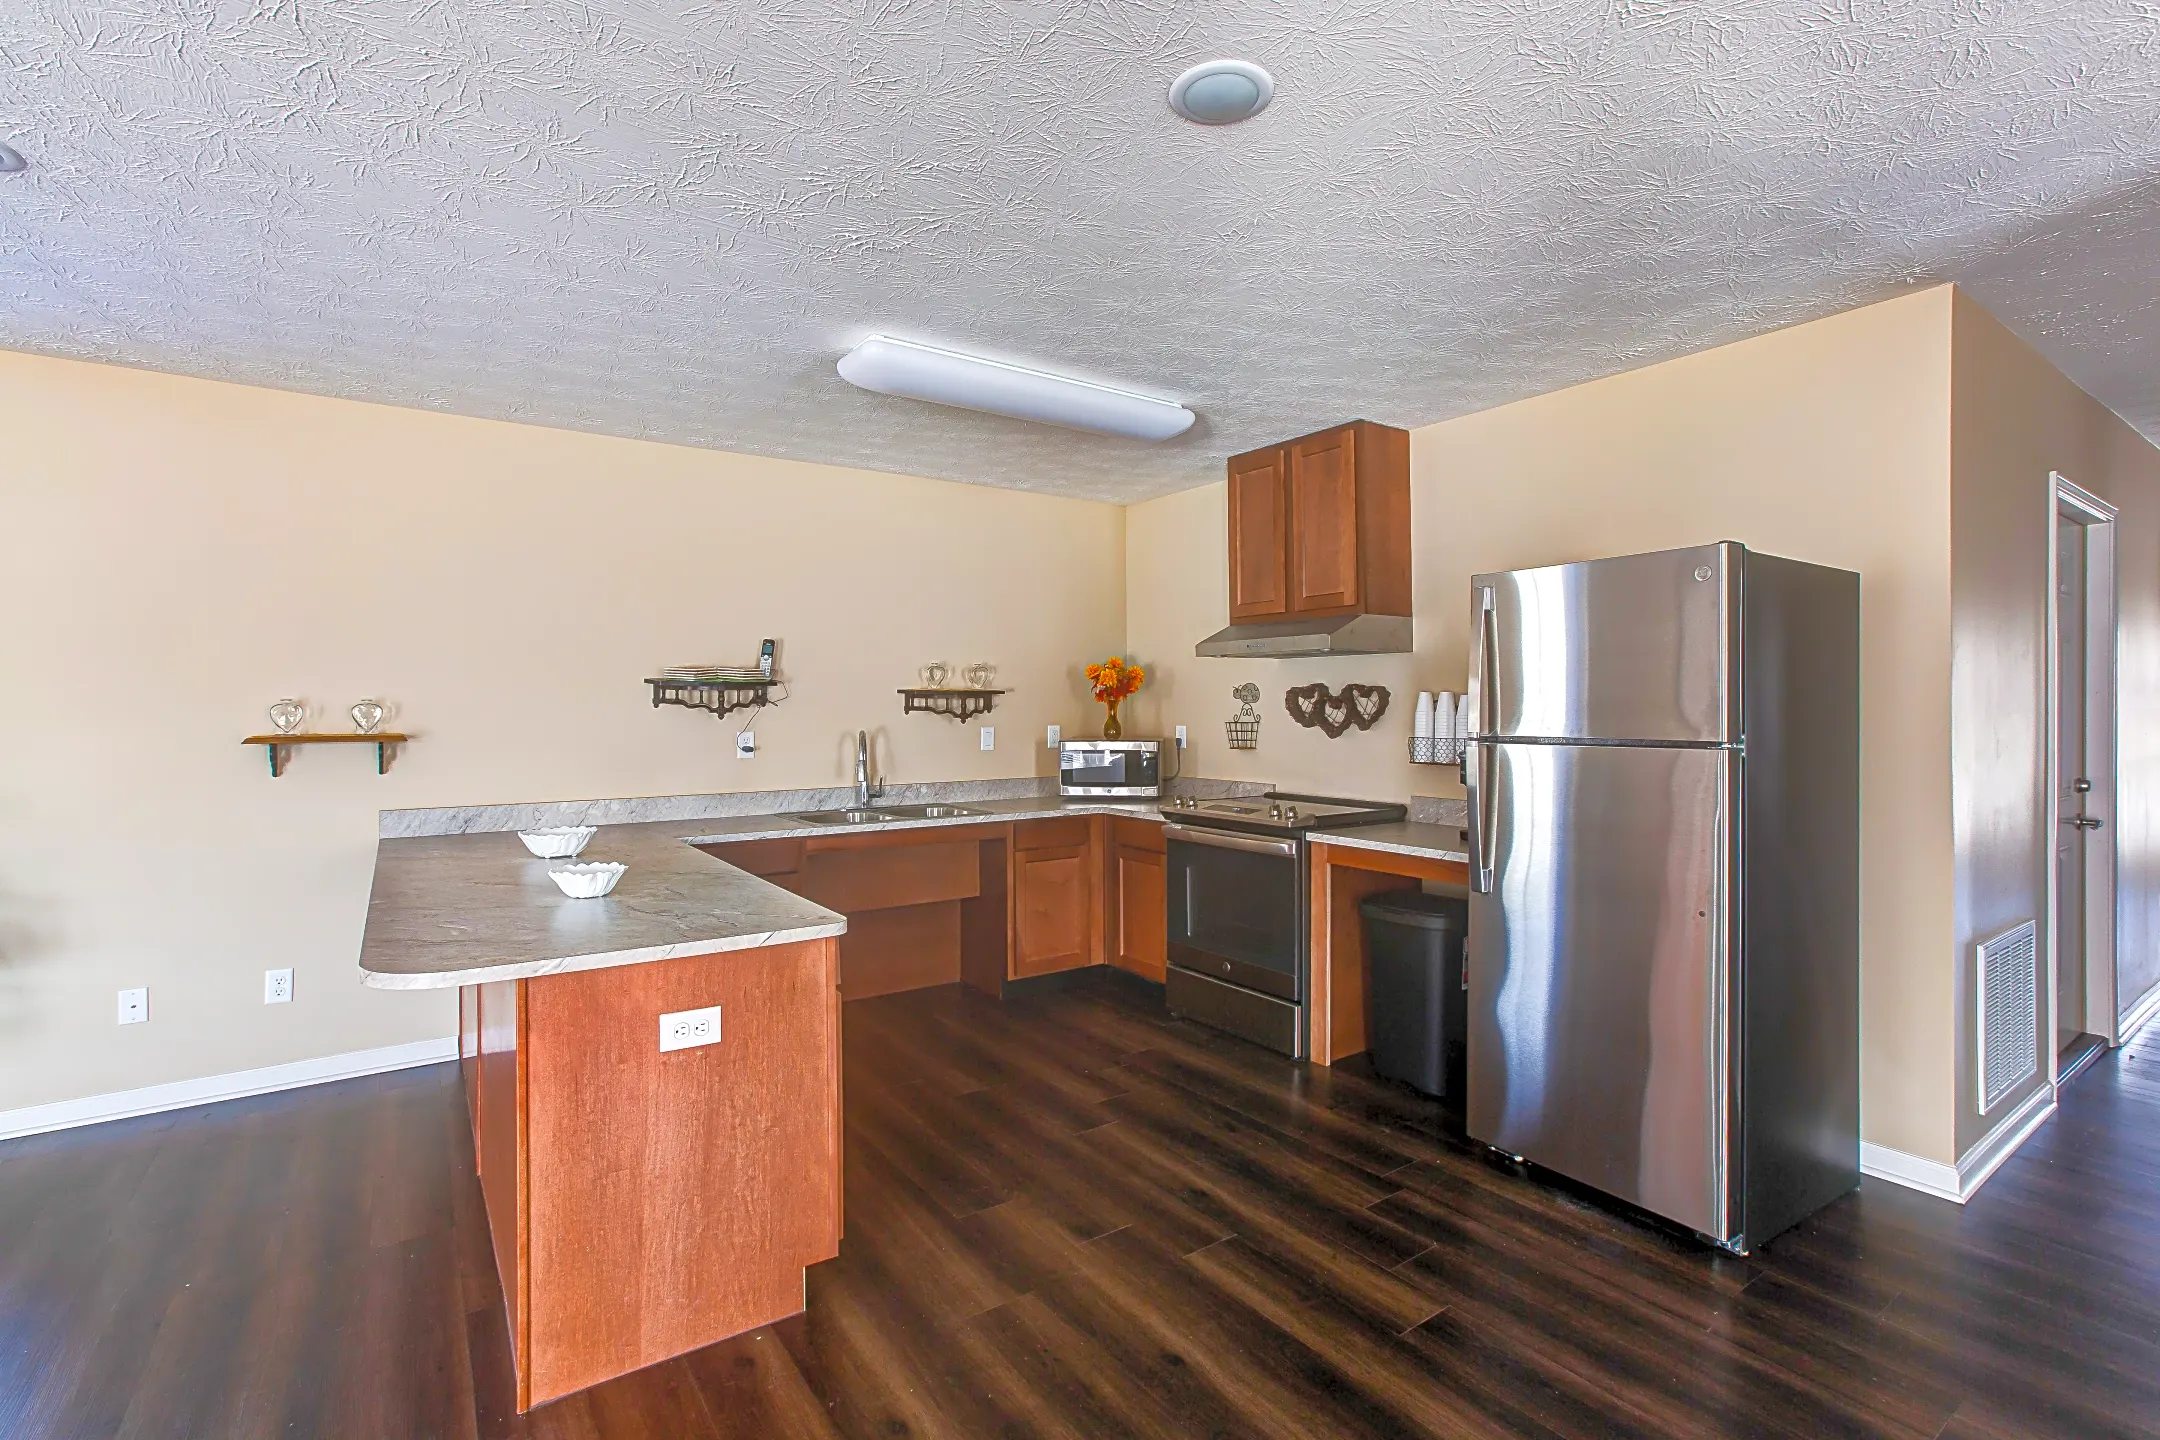 Kitchen - Olive Grove Apartments - New Albany, IN